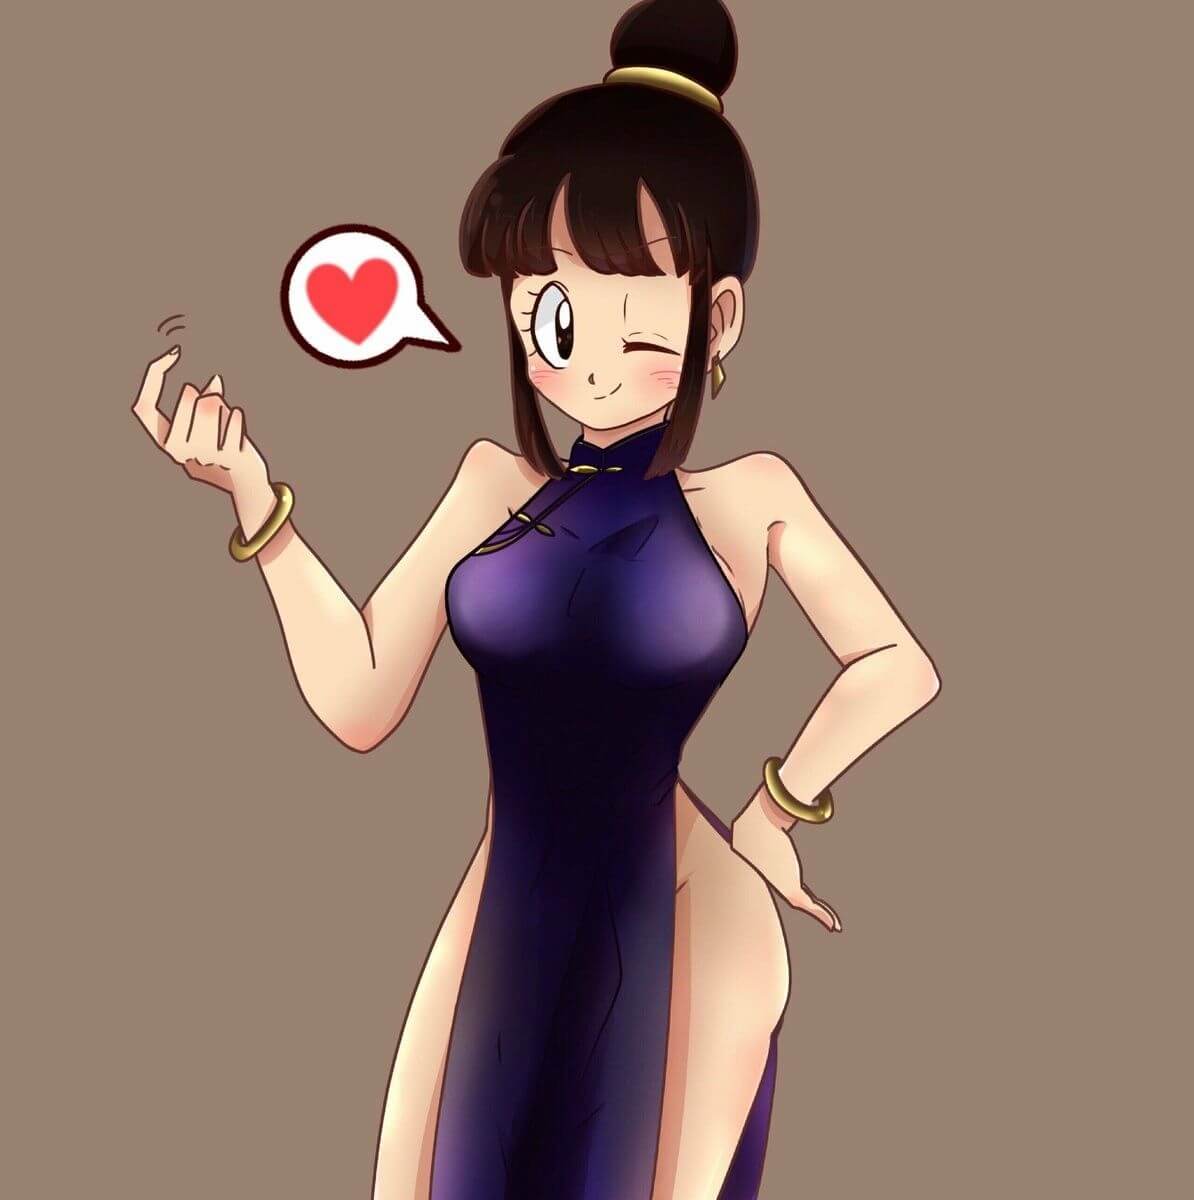 50+ Hot Pictures Of Chi-Chi From Dragon Ball Z Will Make You Drool For Her | Best Of Comic Books